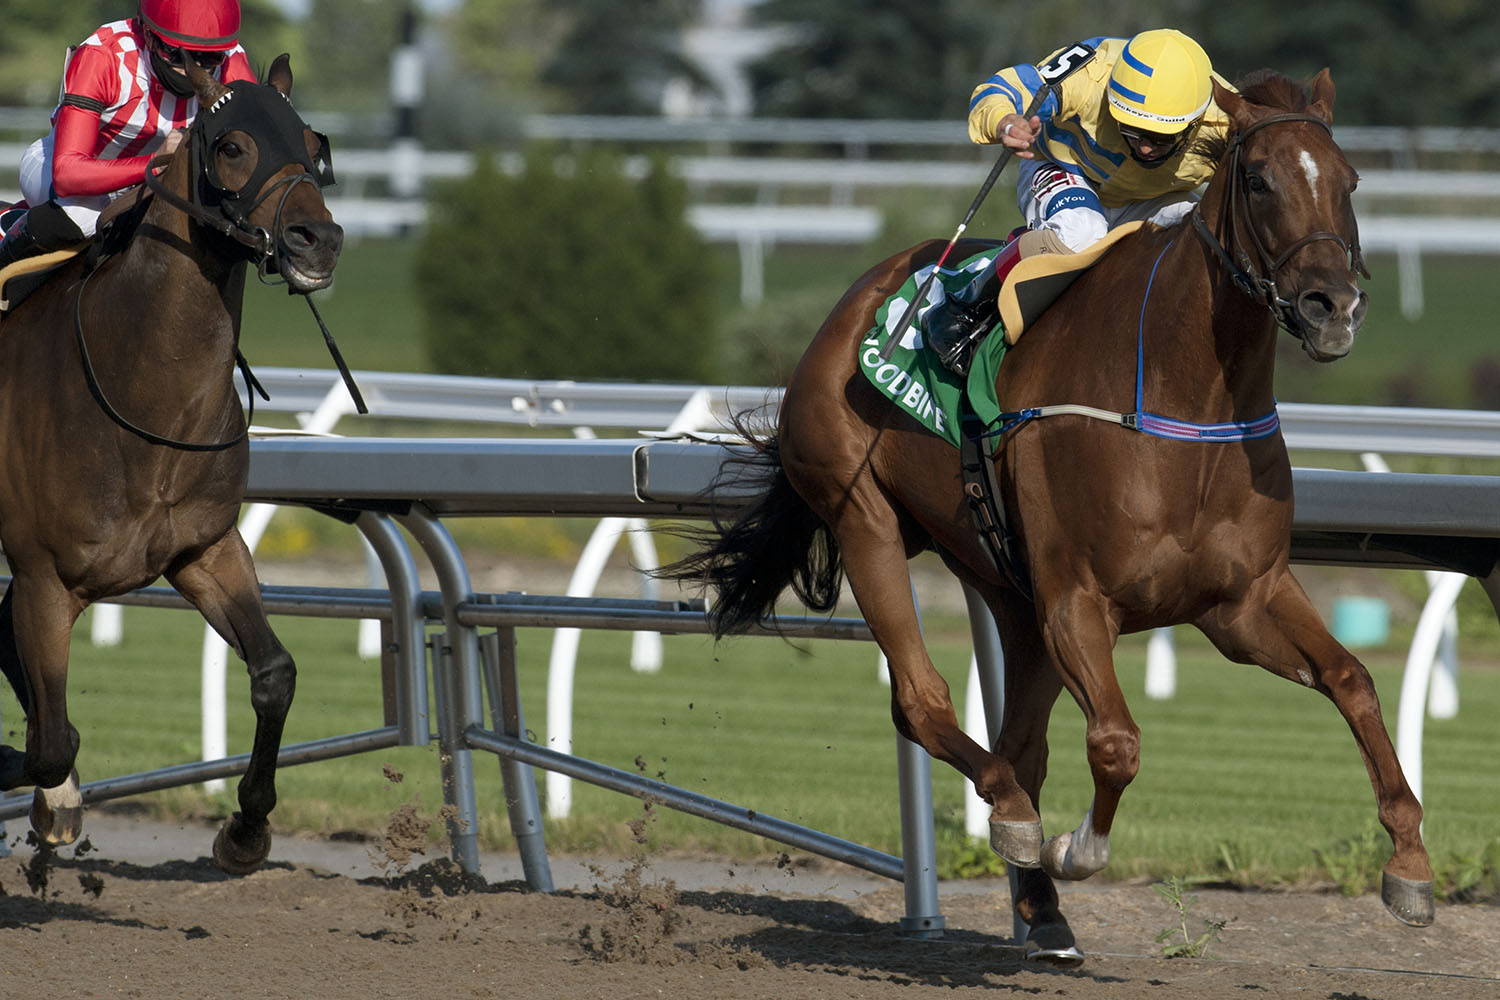 Woodbine Winter Report: March 17, 2021 (Dale Romans discusses Queen’s Plate prospect Smiley Sobotka, Hall of Fame trainer Robert Tiller talks Pink Lloyd and other stable stars, Ontario stallion Prime Attraction, and more)